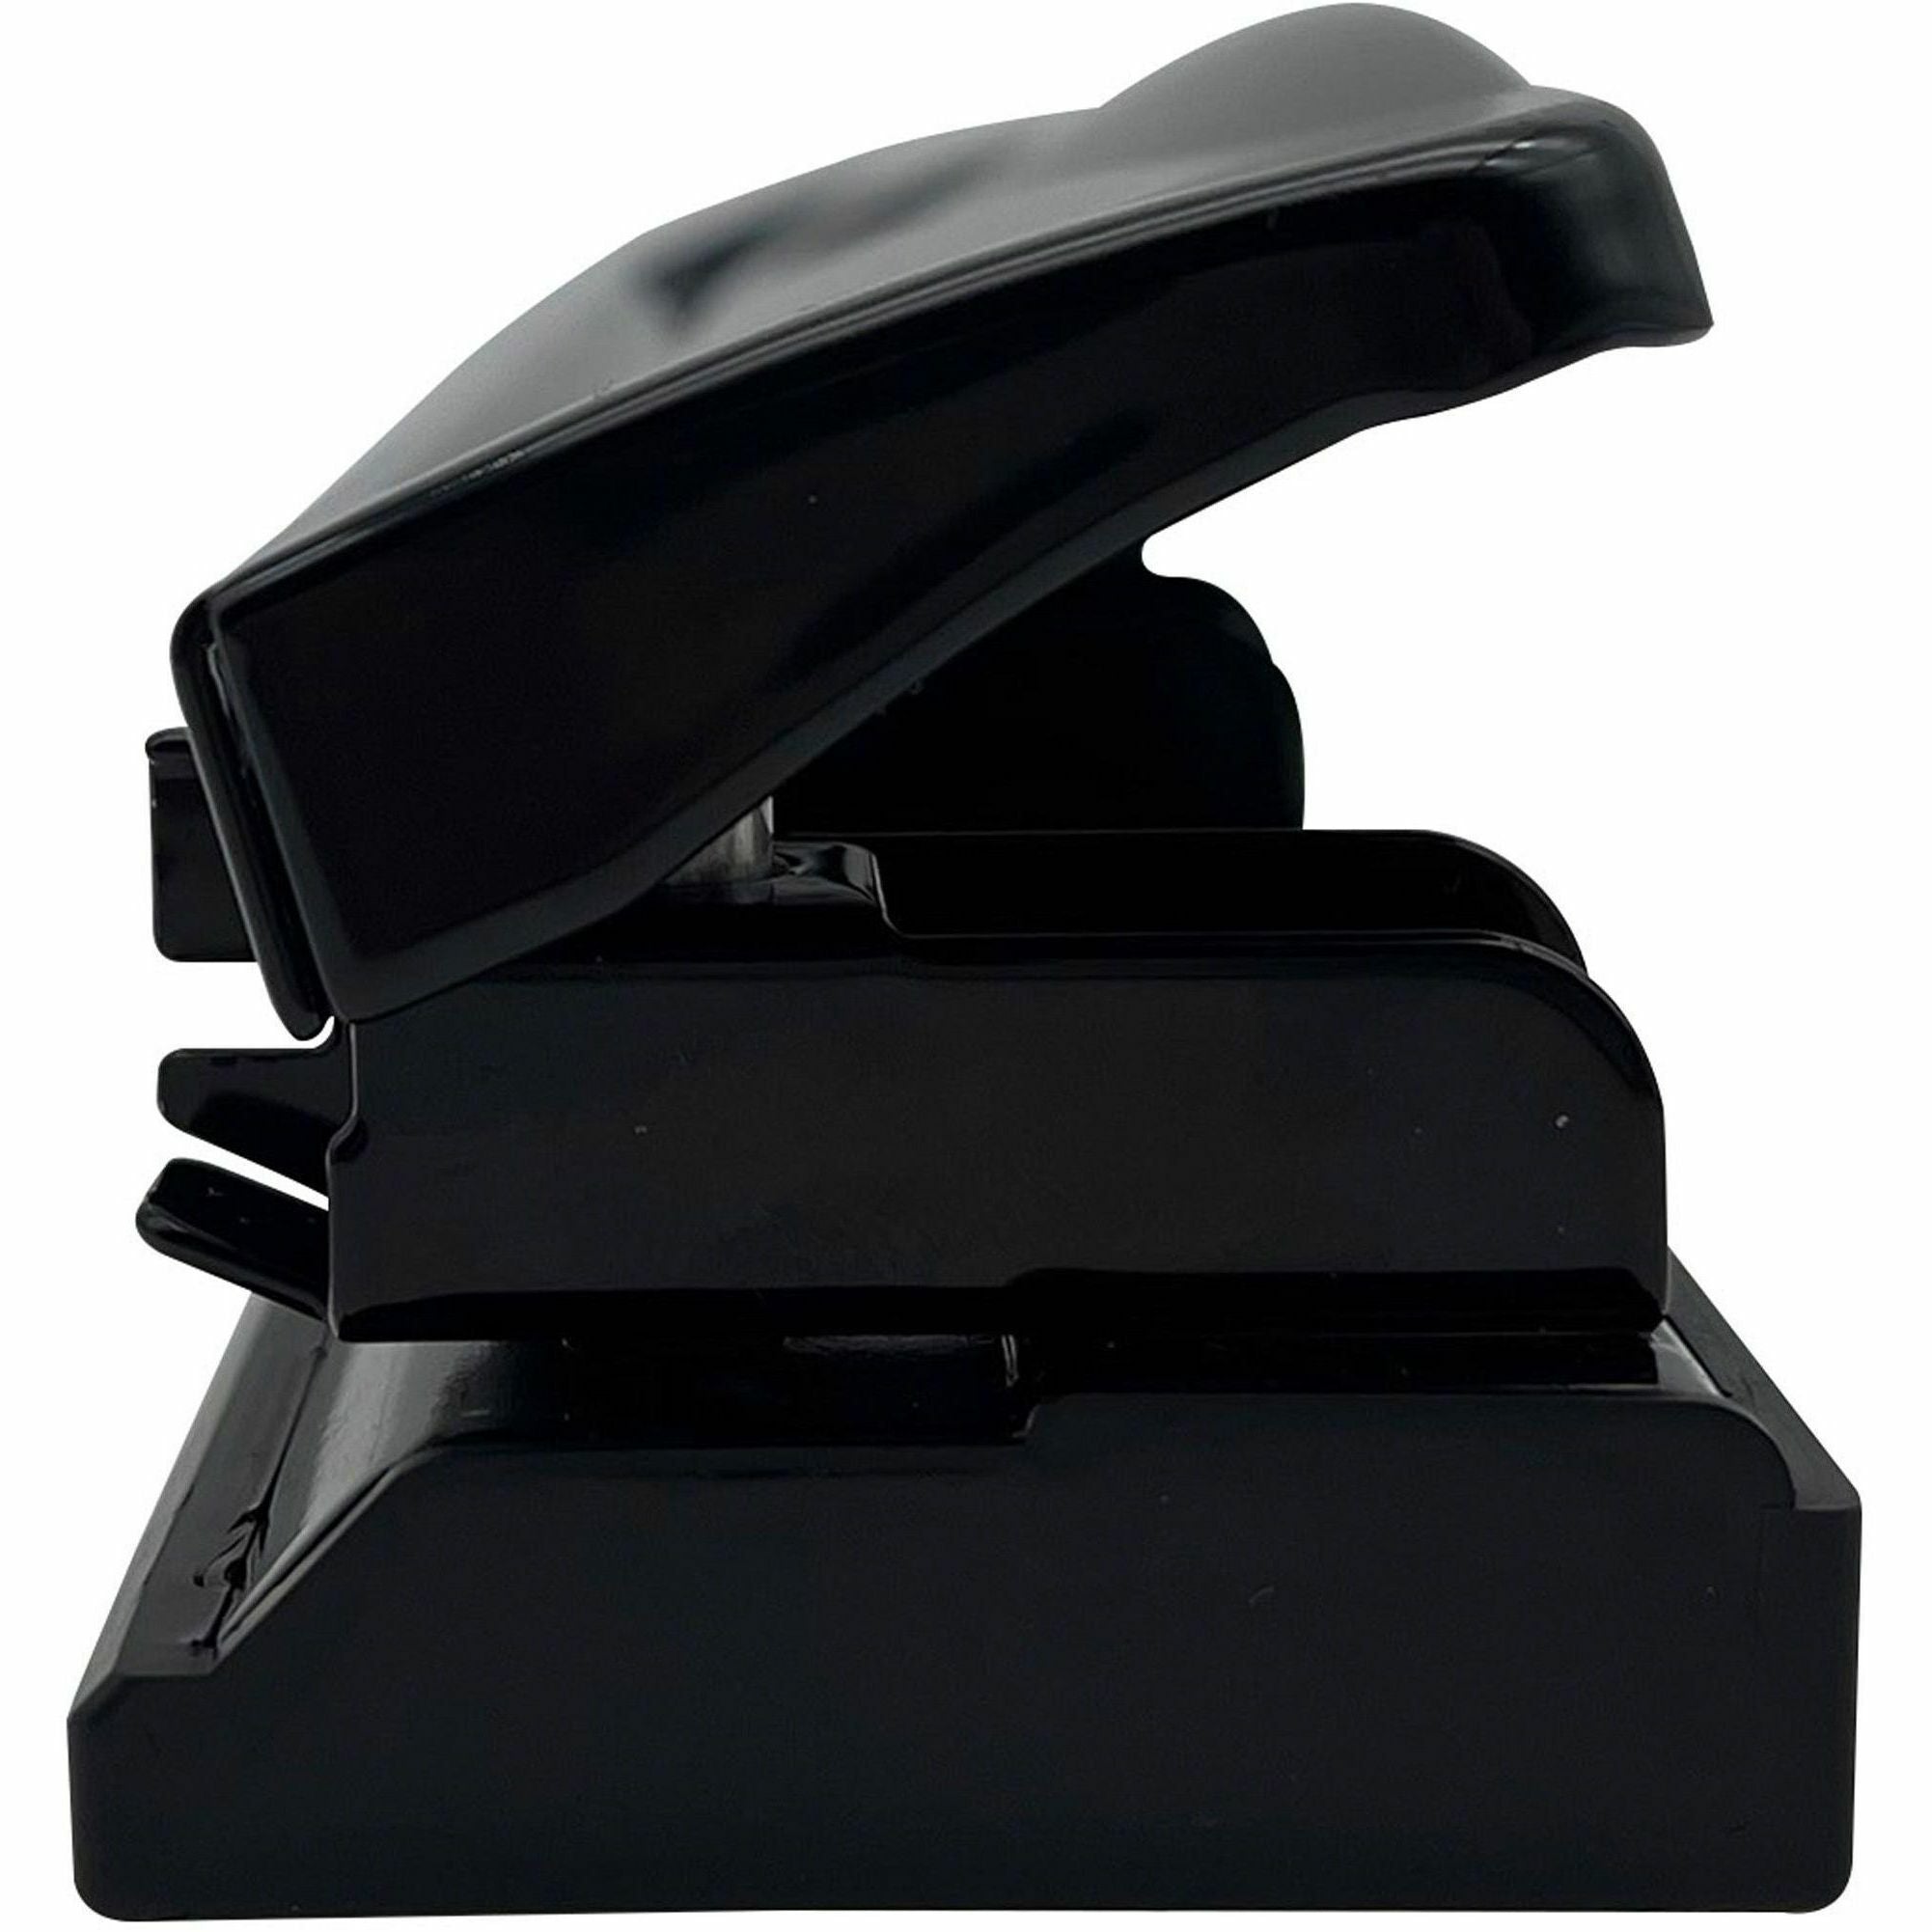 business-source-nonadjustable-3-hole-punch-10-sheet-1-4-punch-size-round-shape-black_bsn65655 - 4